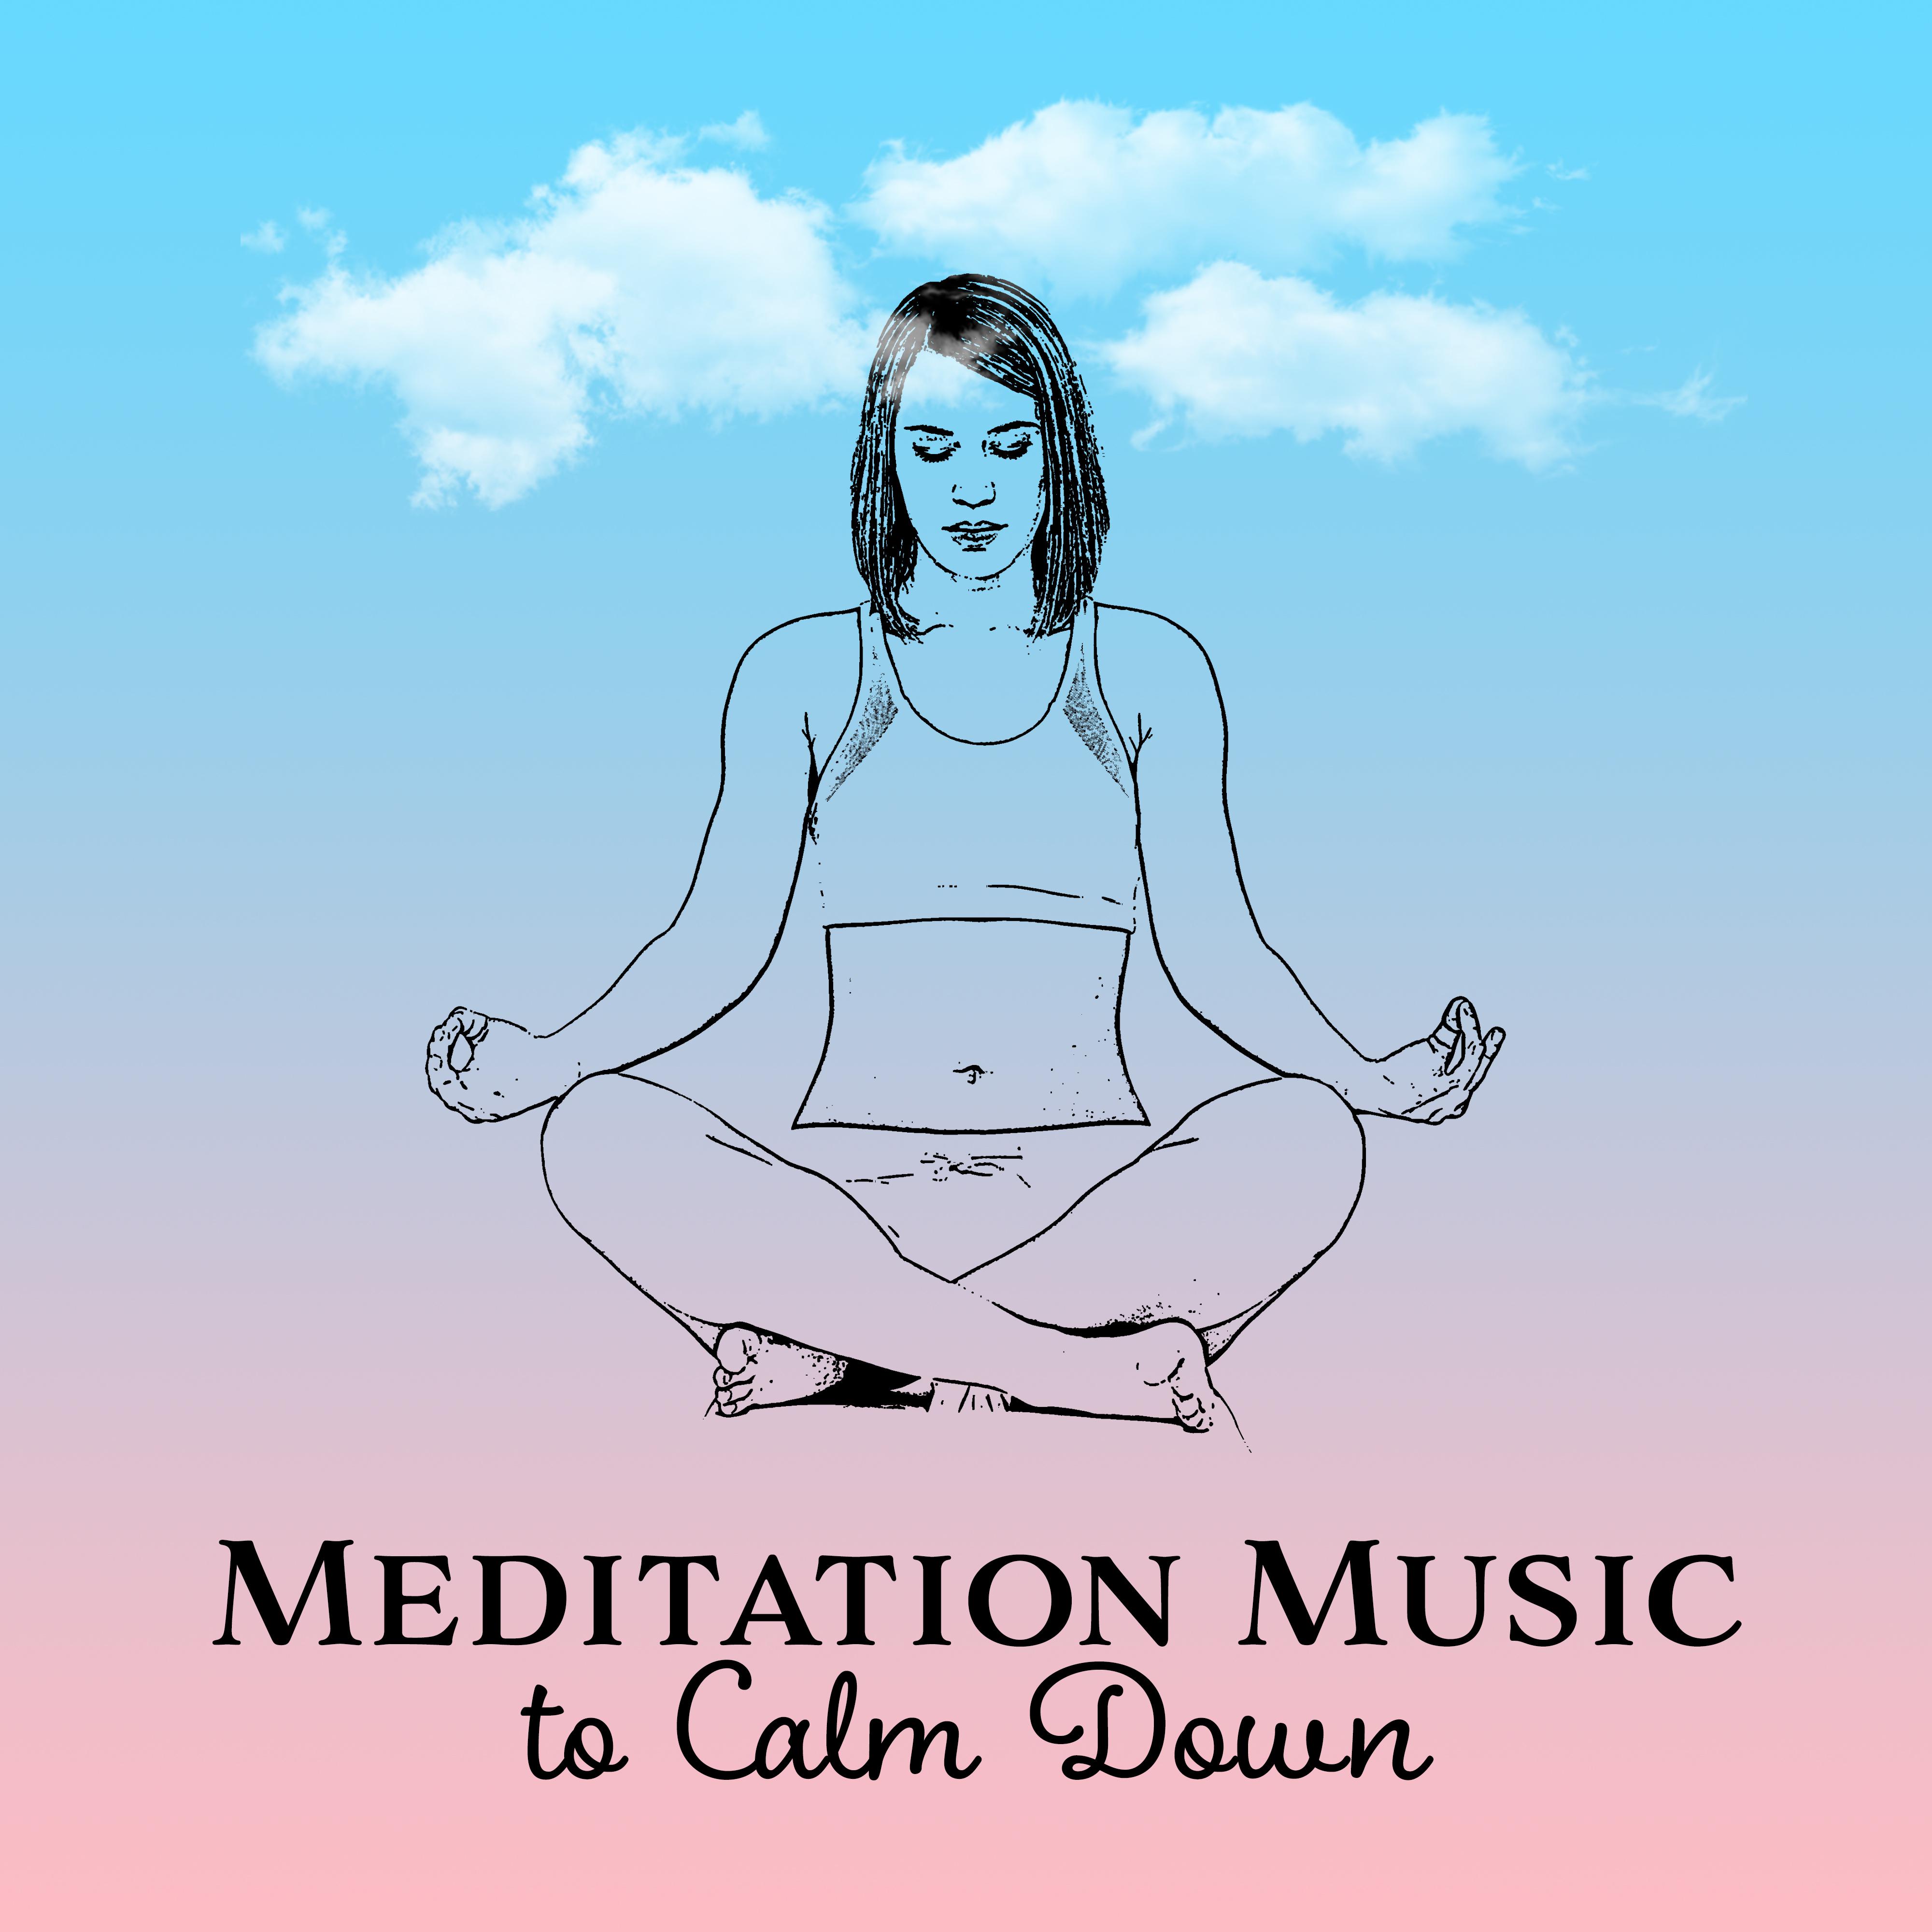 Meditation Music to Calm Down – Meditation Melodies, Spirit Lounge, Buddha Sounds, Soul Relaxation